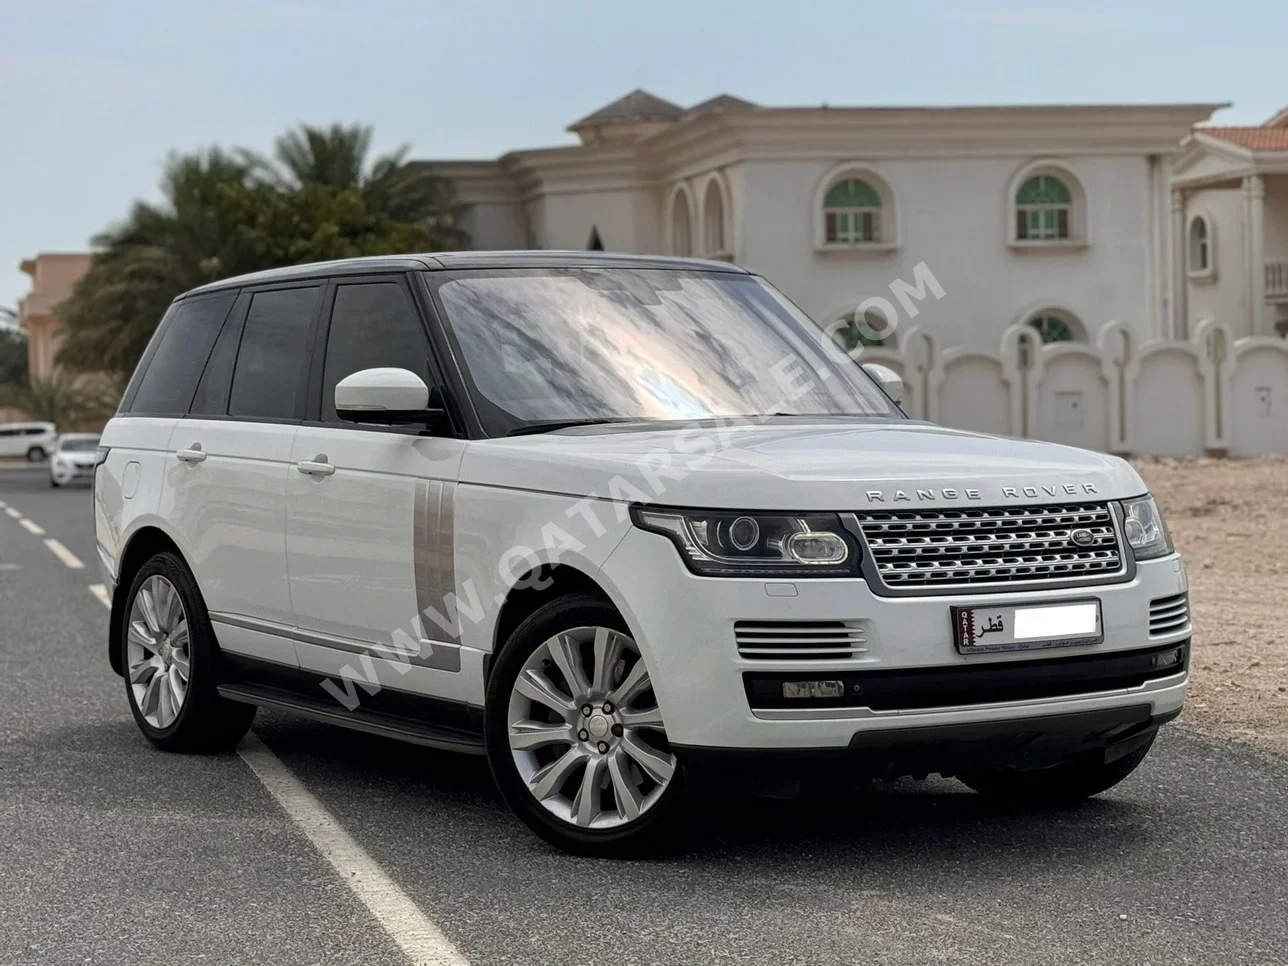 Land Rover  Range Rover  Vogue Super charged  2014  Automatic  182,000 Km  8 Cylinder  Four Wheel Drive (4WD)  SUV  White